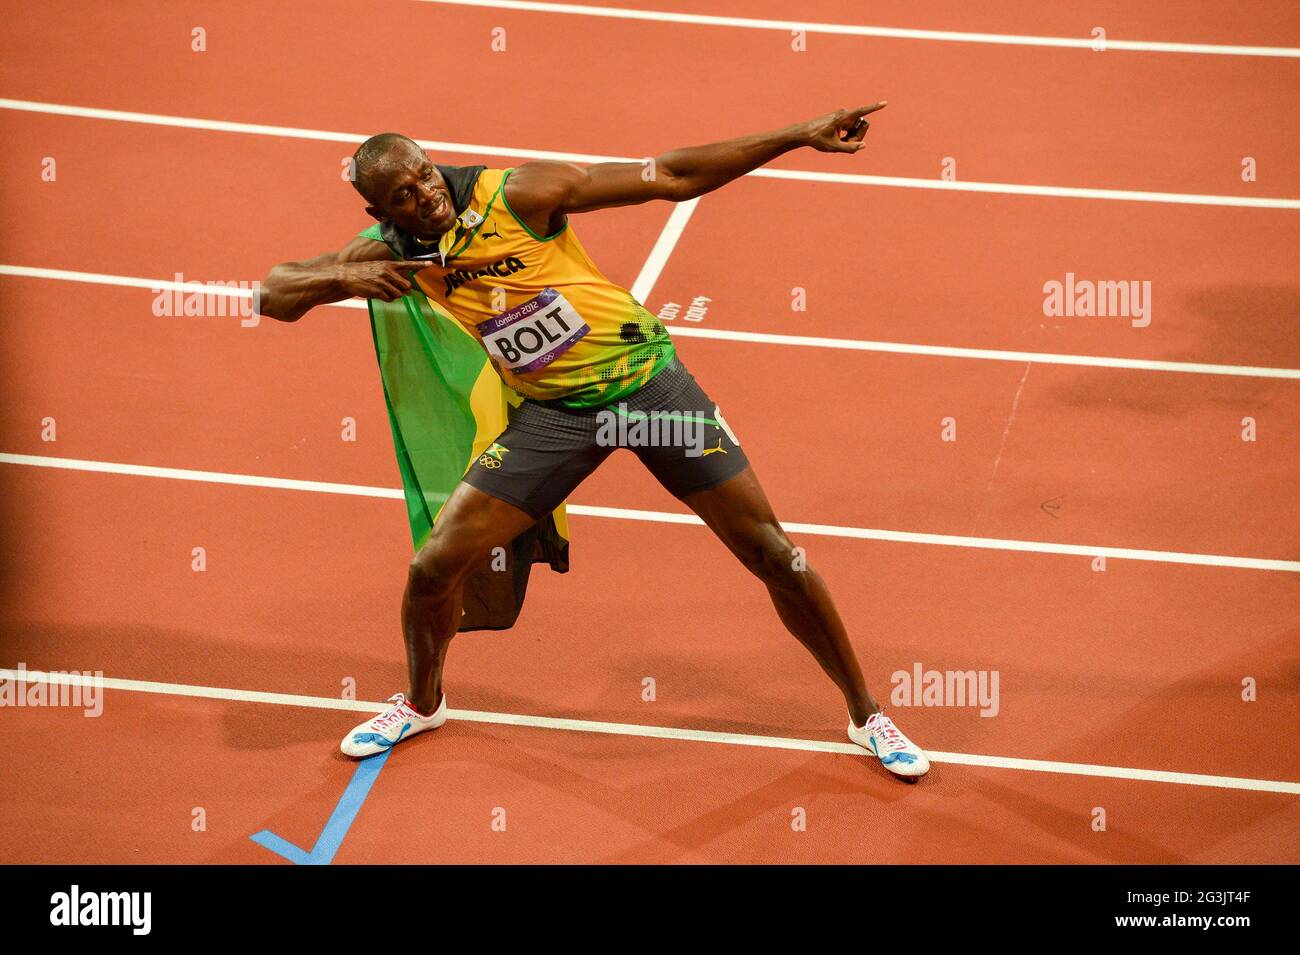 LONDON, ENGLAND - AUGUST 5, Usain Bolt of Jamaica  during the evening session of athletics at the Olympic Stadium  on August 5, 2012 in London, England Photo by Roger Sedres / Gallo Images Stock Photo